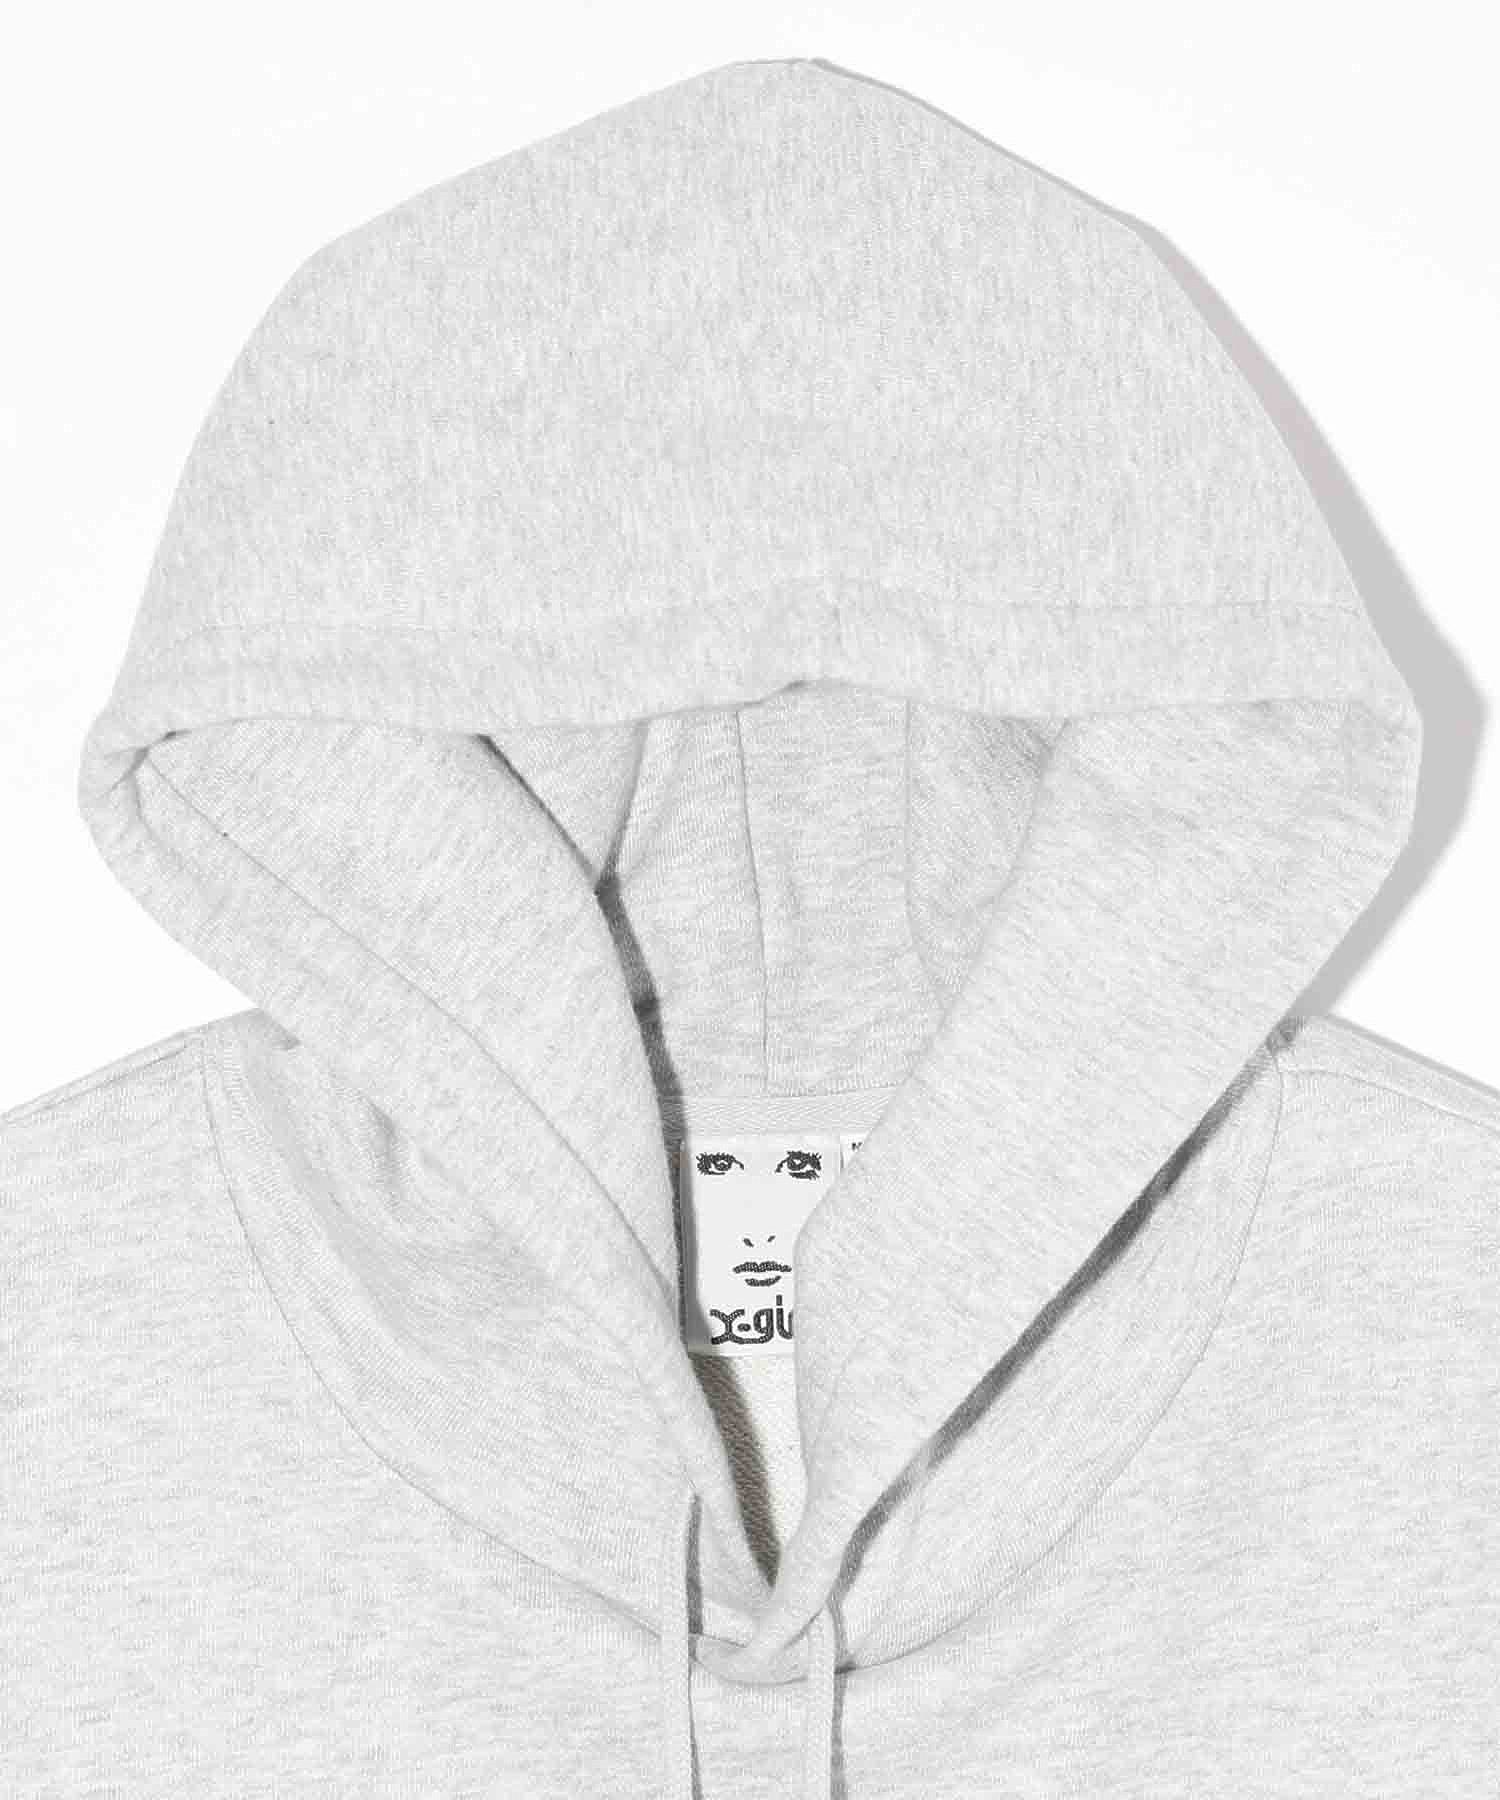 FACE PATCH SWEAT HOODIE X-girl